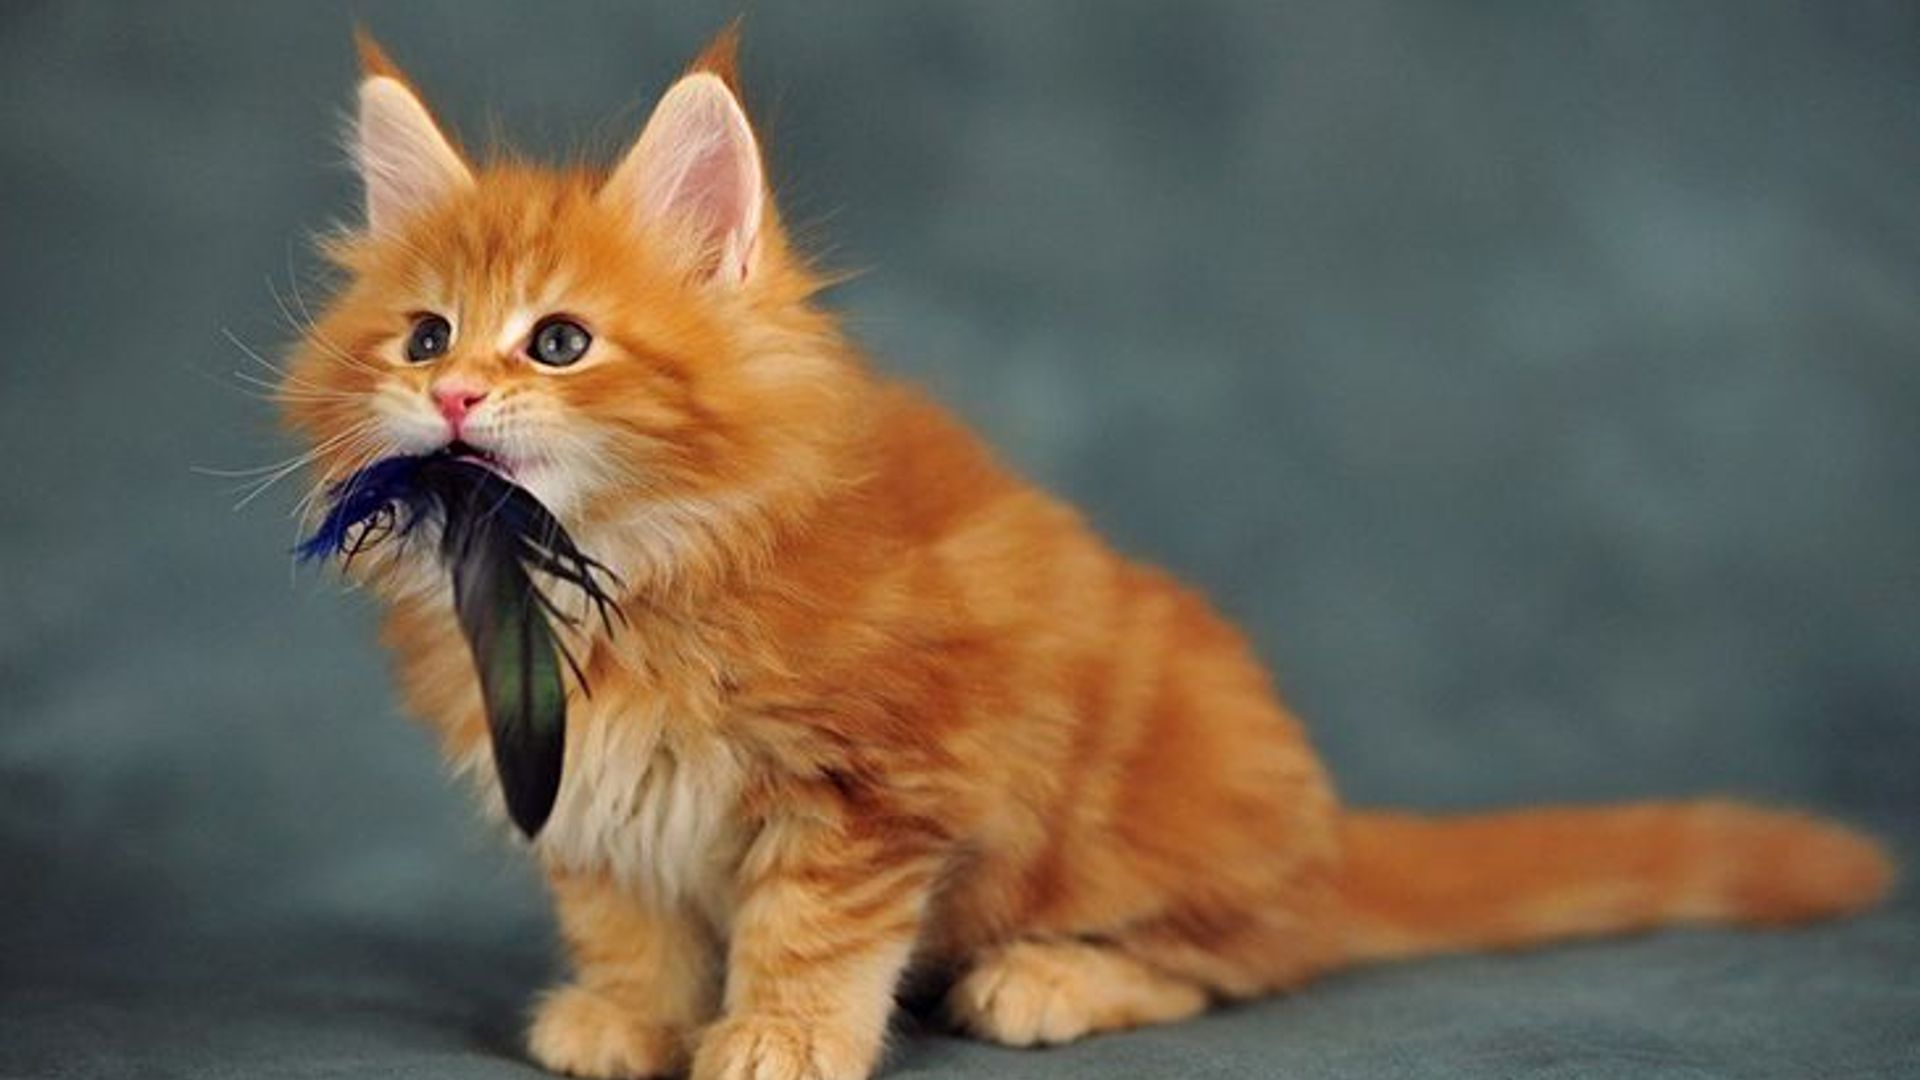 The kitten of maine coon weighs about 150 grams, while ordinary cats have kittens with weight of about 80 grams